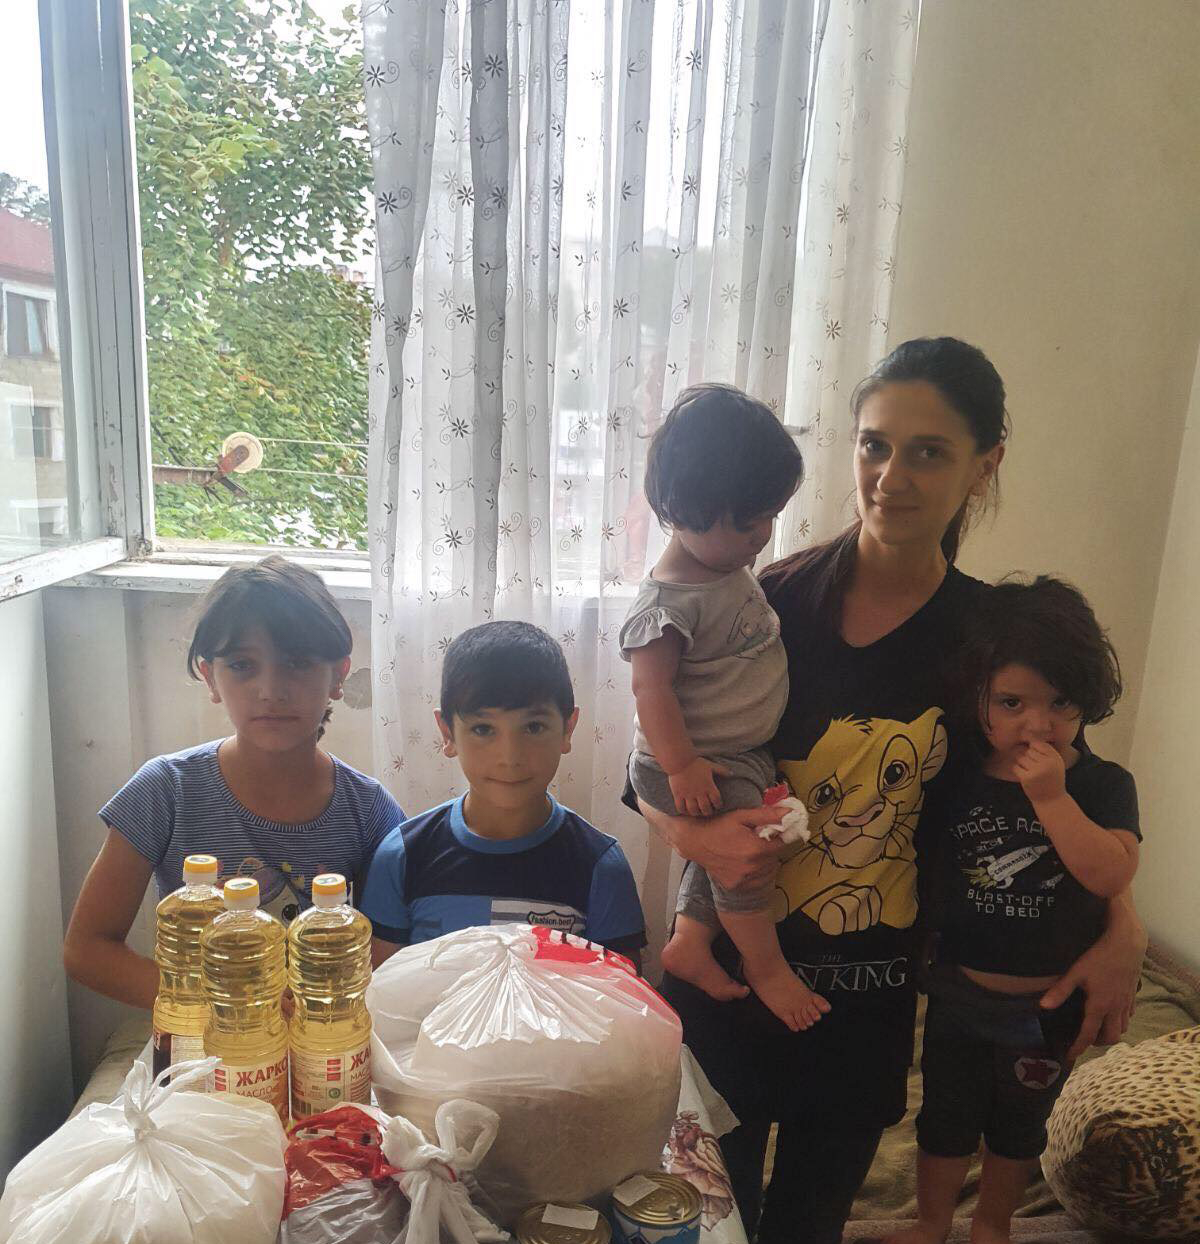 Bringing food packs to a family that moved from Nagorno-Karabakh to Armenia.